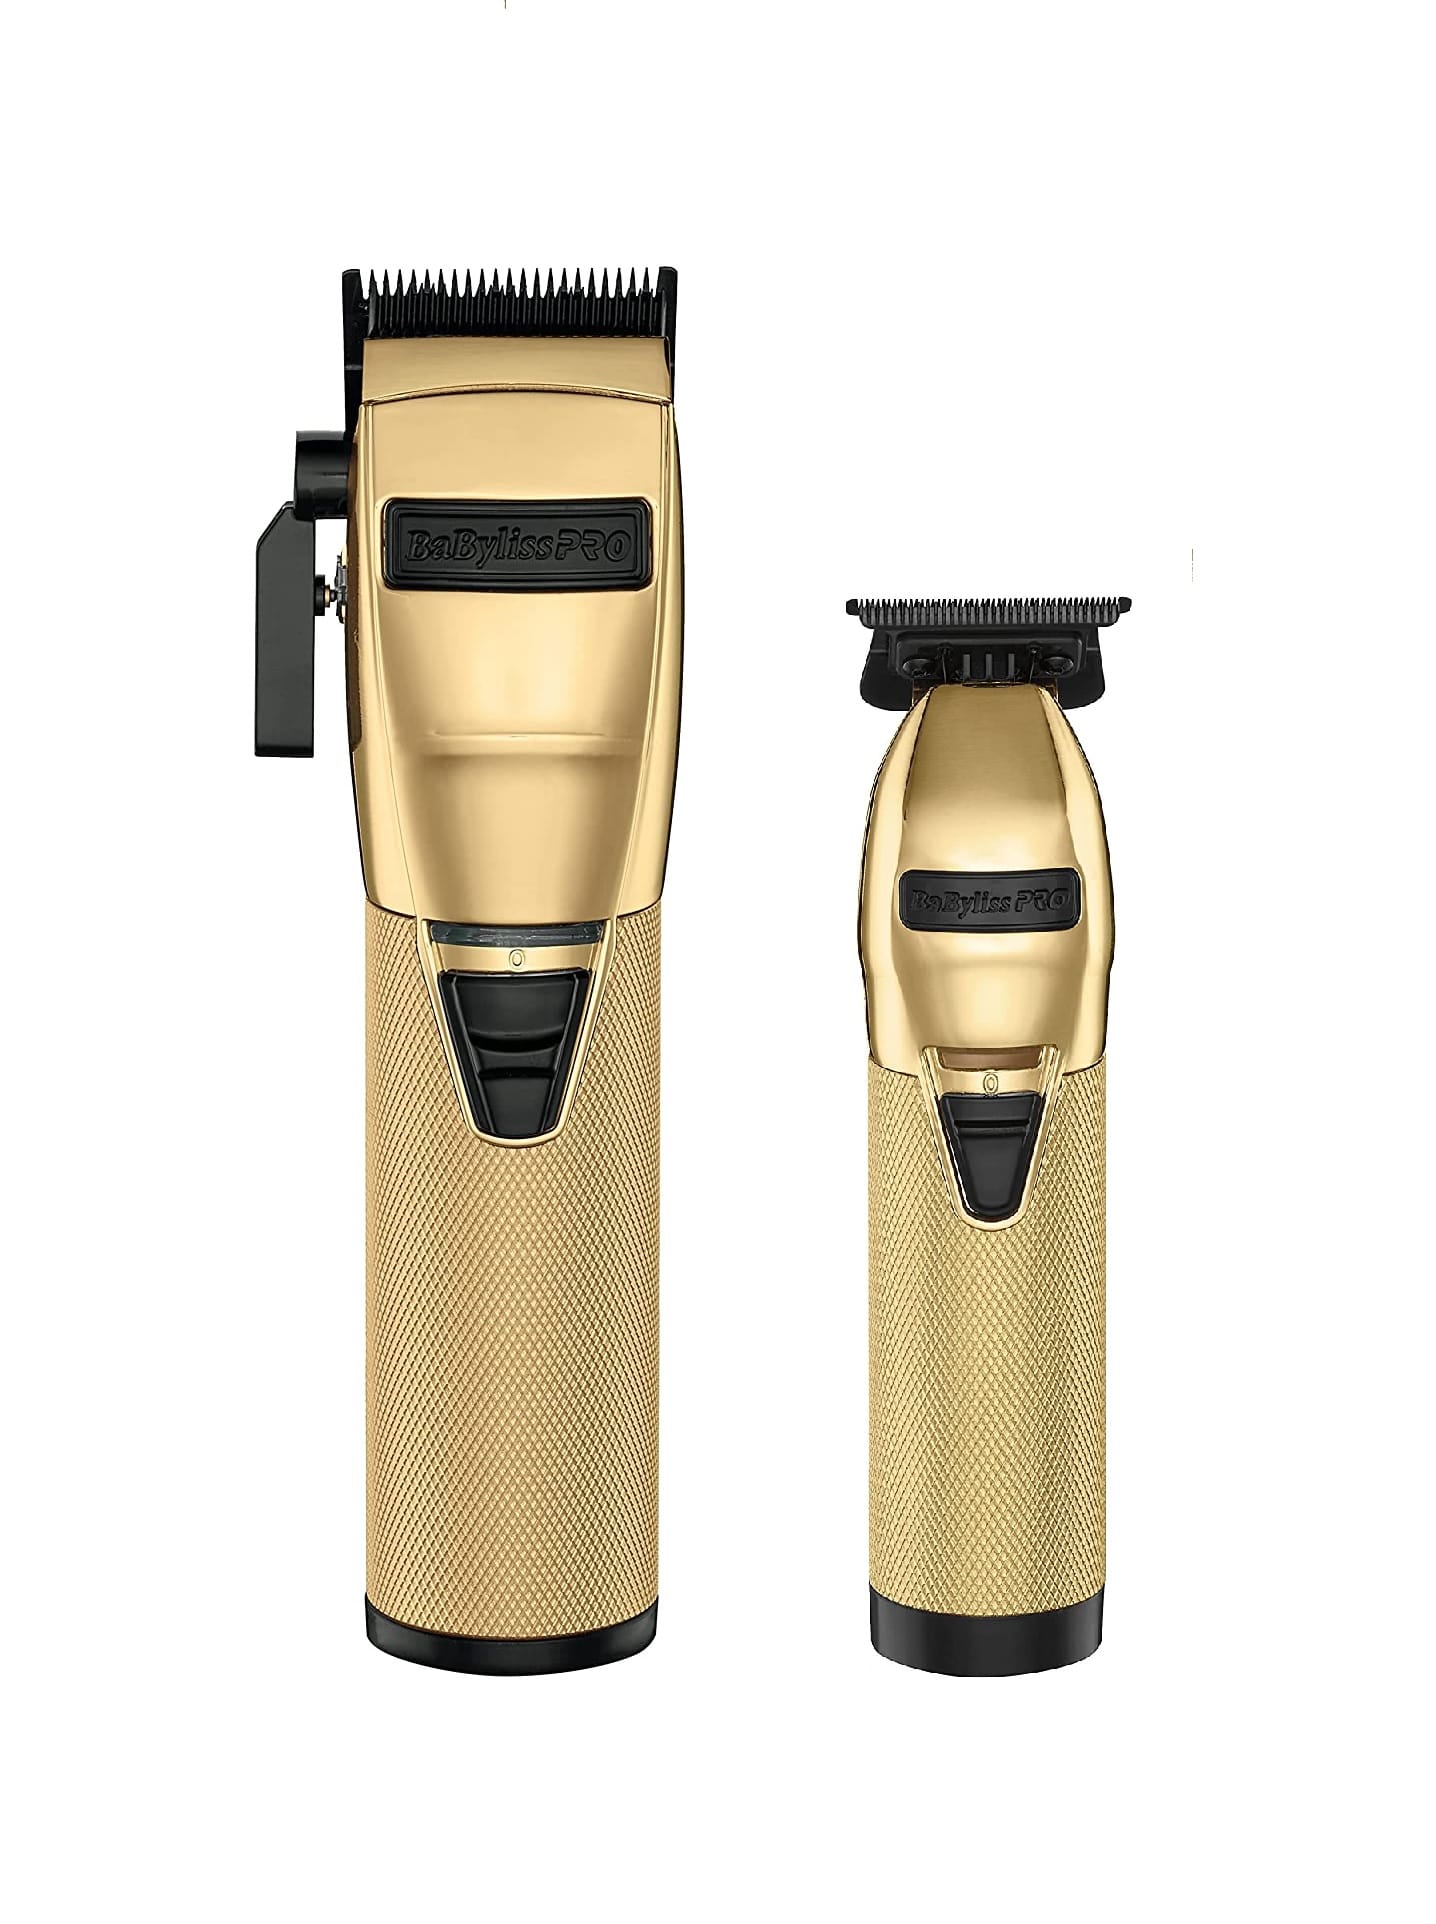 Are babyliss clippers/trimmers just hyped up? : r/Barber